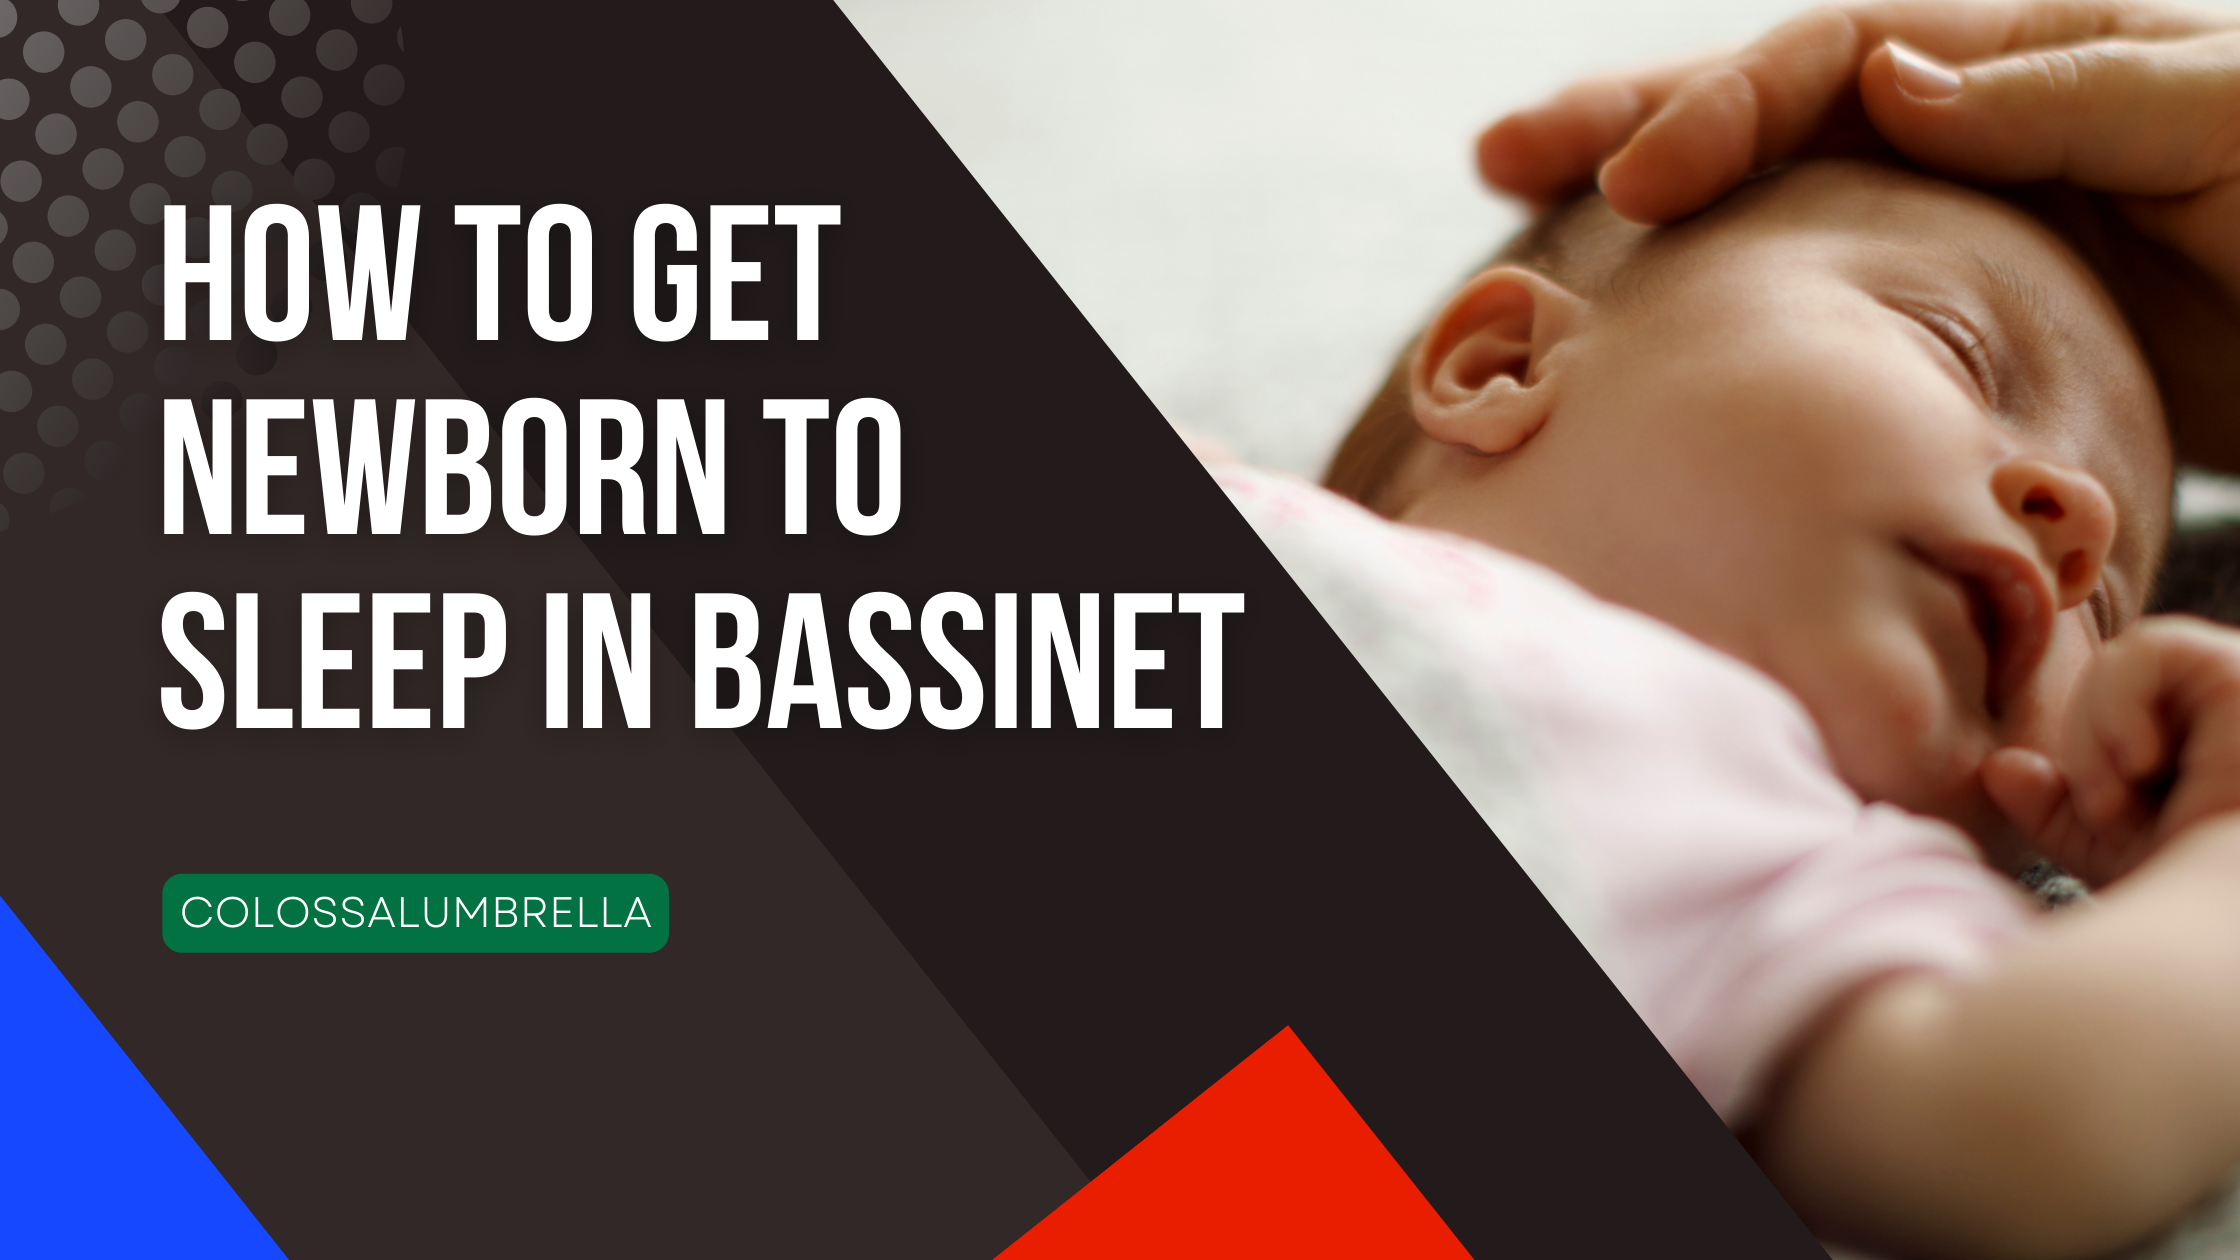 How to Get Newborn to Sleep in Bassinet